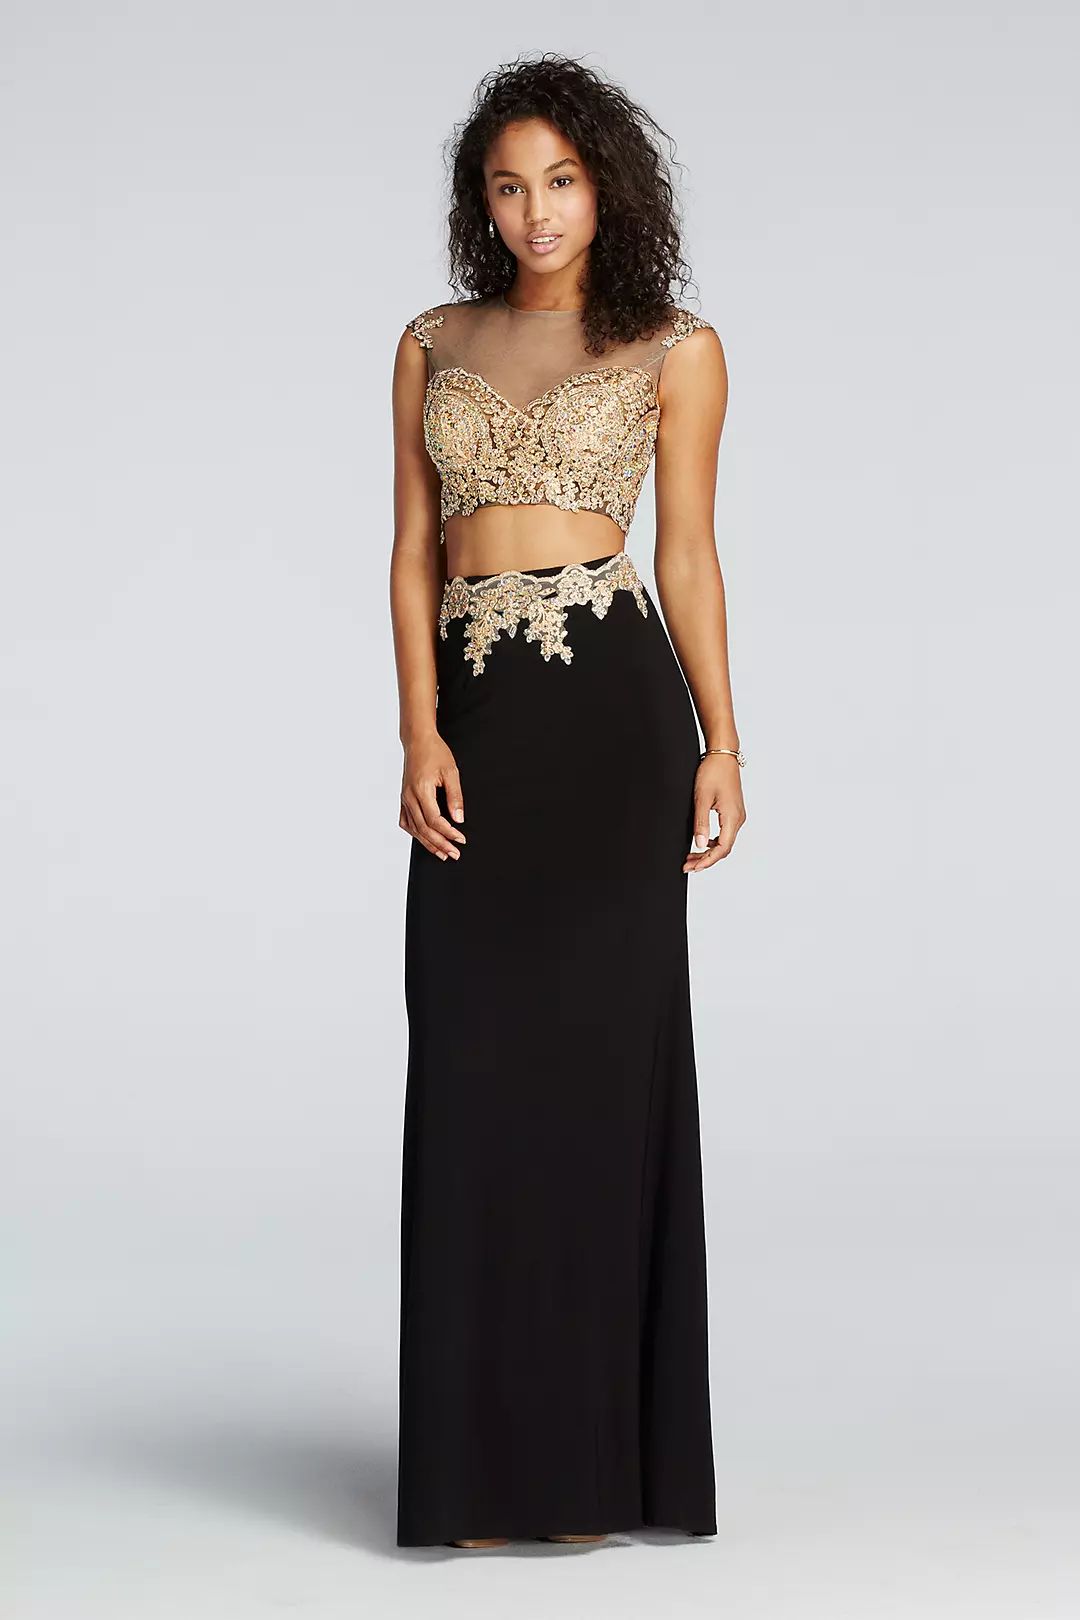 Beaded Two Piece Illusion Prom Crop Top and Skirt Image